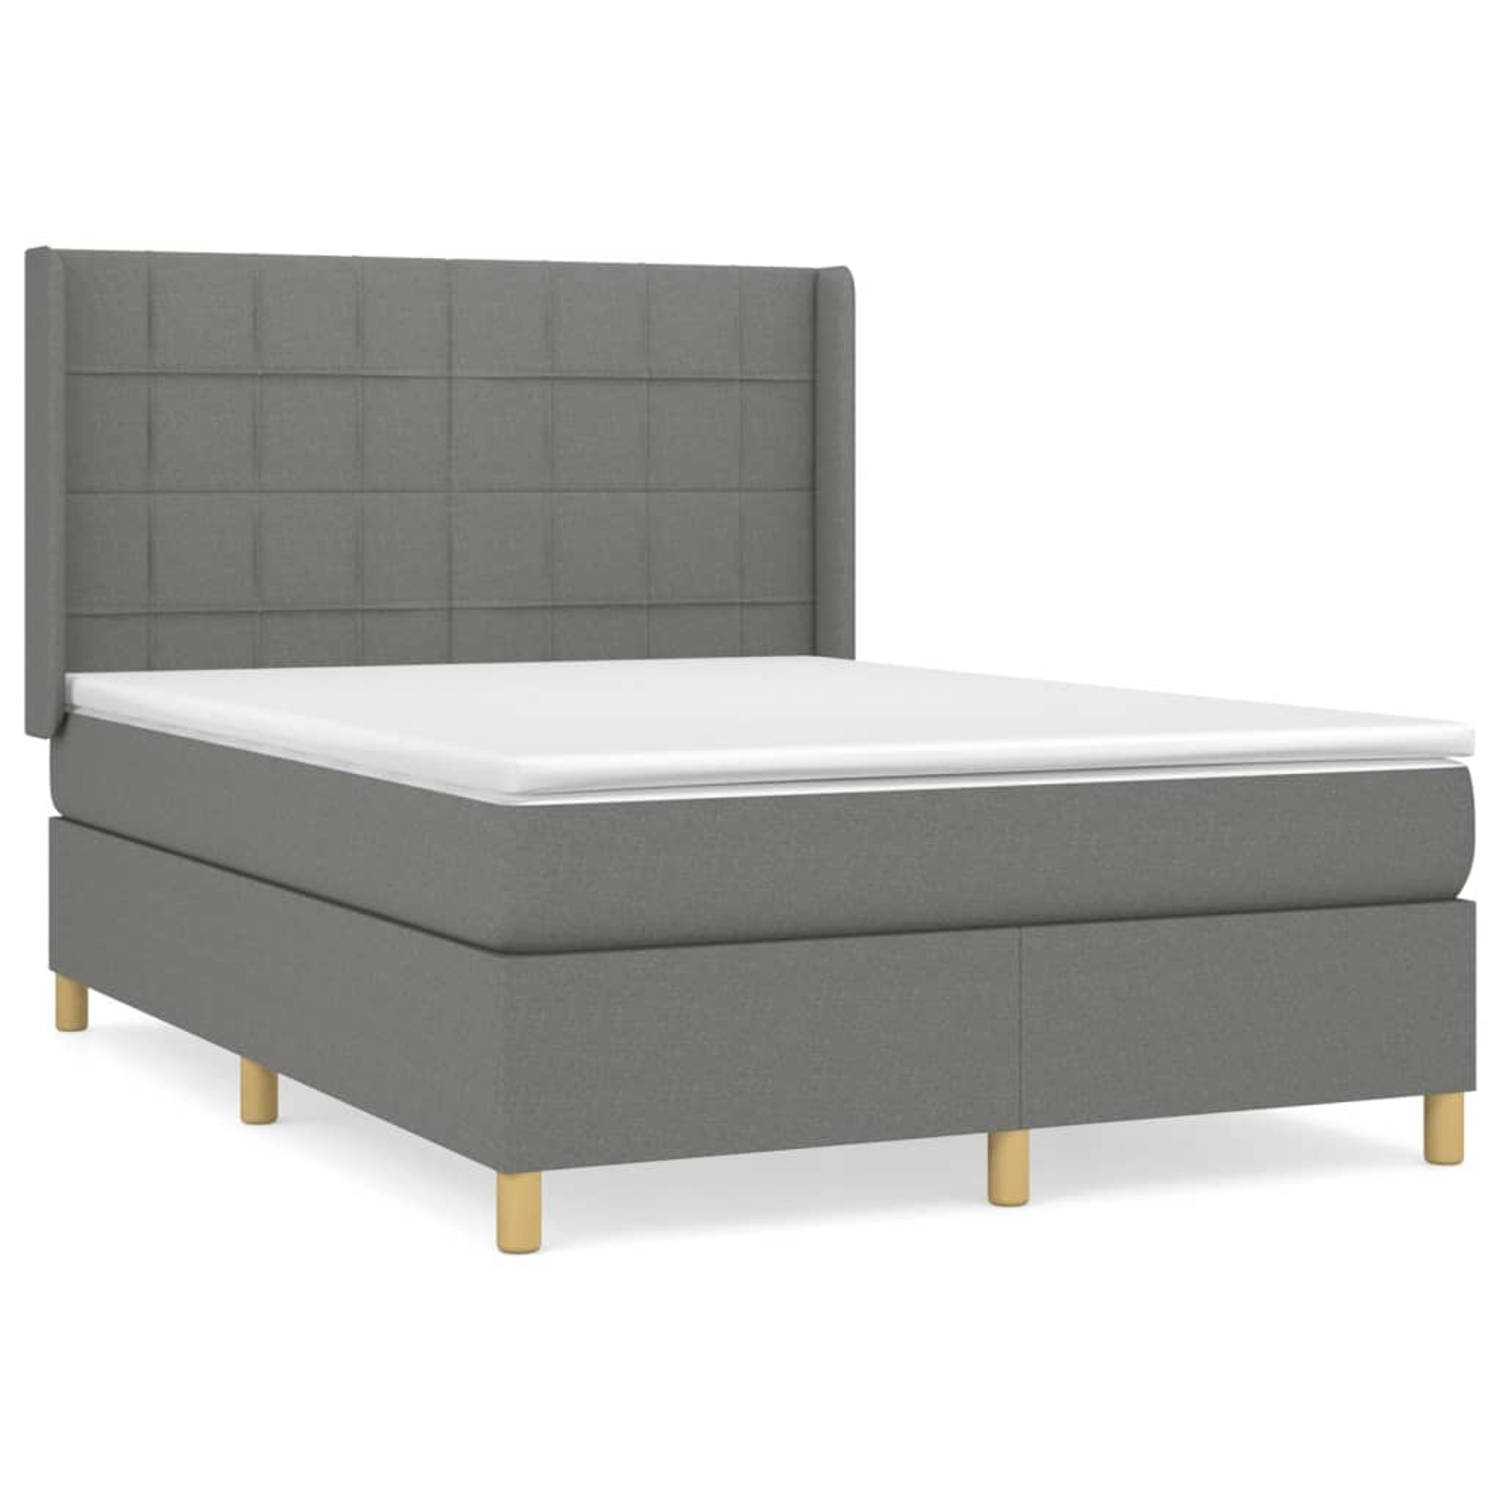 The Living Store Boxspringbed - Comfort - Bed - 193 x 147 x 118/128 cm - Donkergrijs